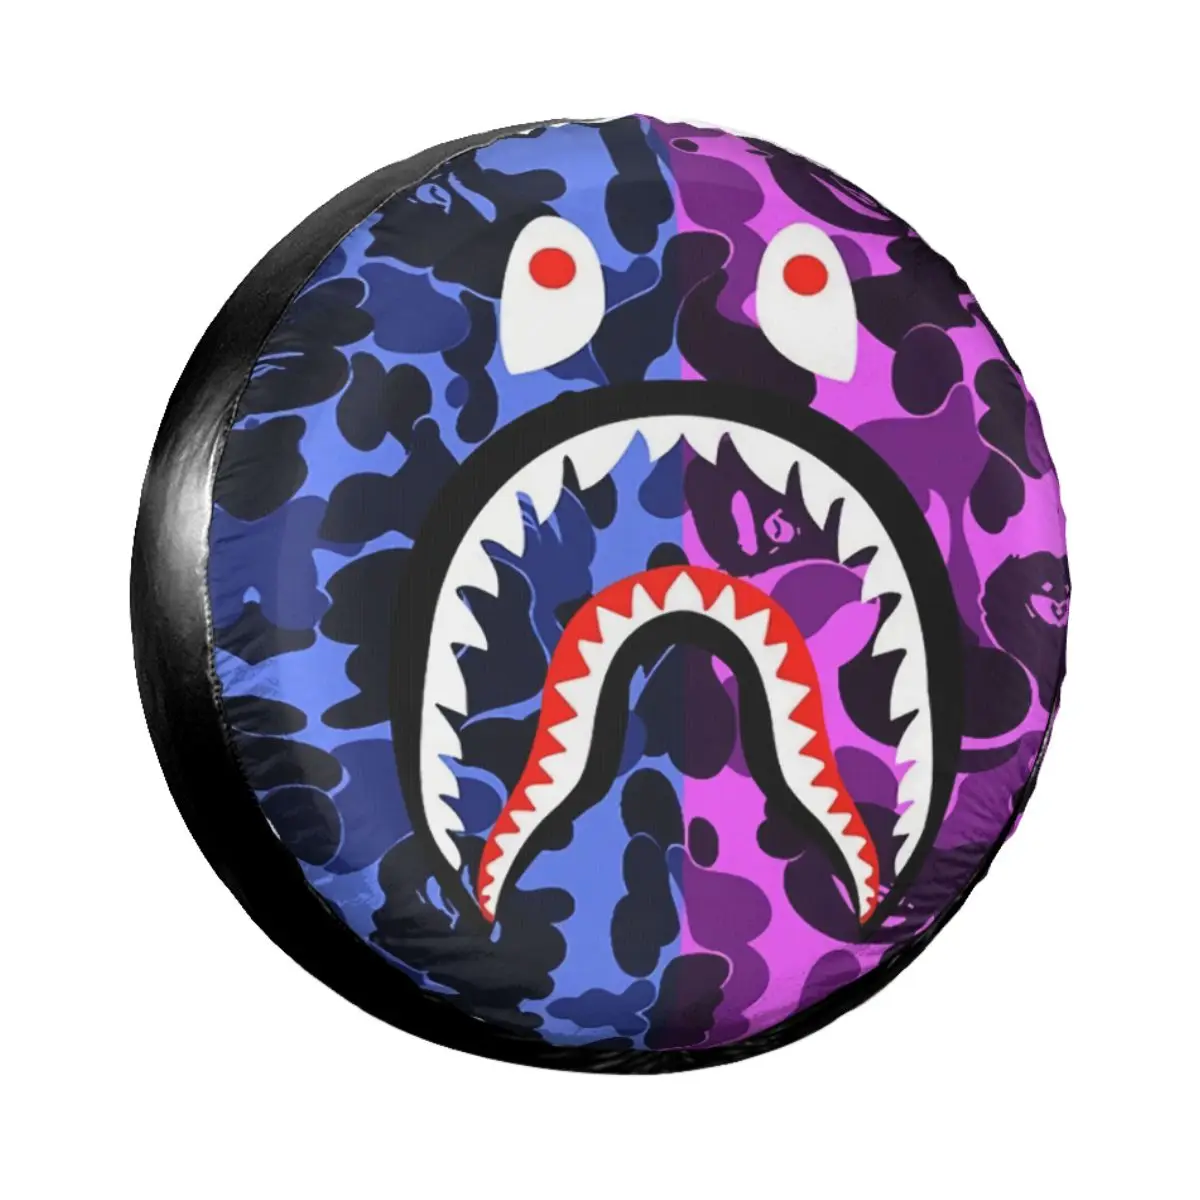 https://ae01.alicdn.com/kf/S870fafe519a14e0ca9b3a4010647fdb32/Camo-Shark-Teeth-Spare-Tire-Cover-Dust-Proof-Yellow-Camouflage-Bape-Wheel-Covers-for-Jeep-Hummer.jpg